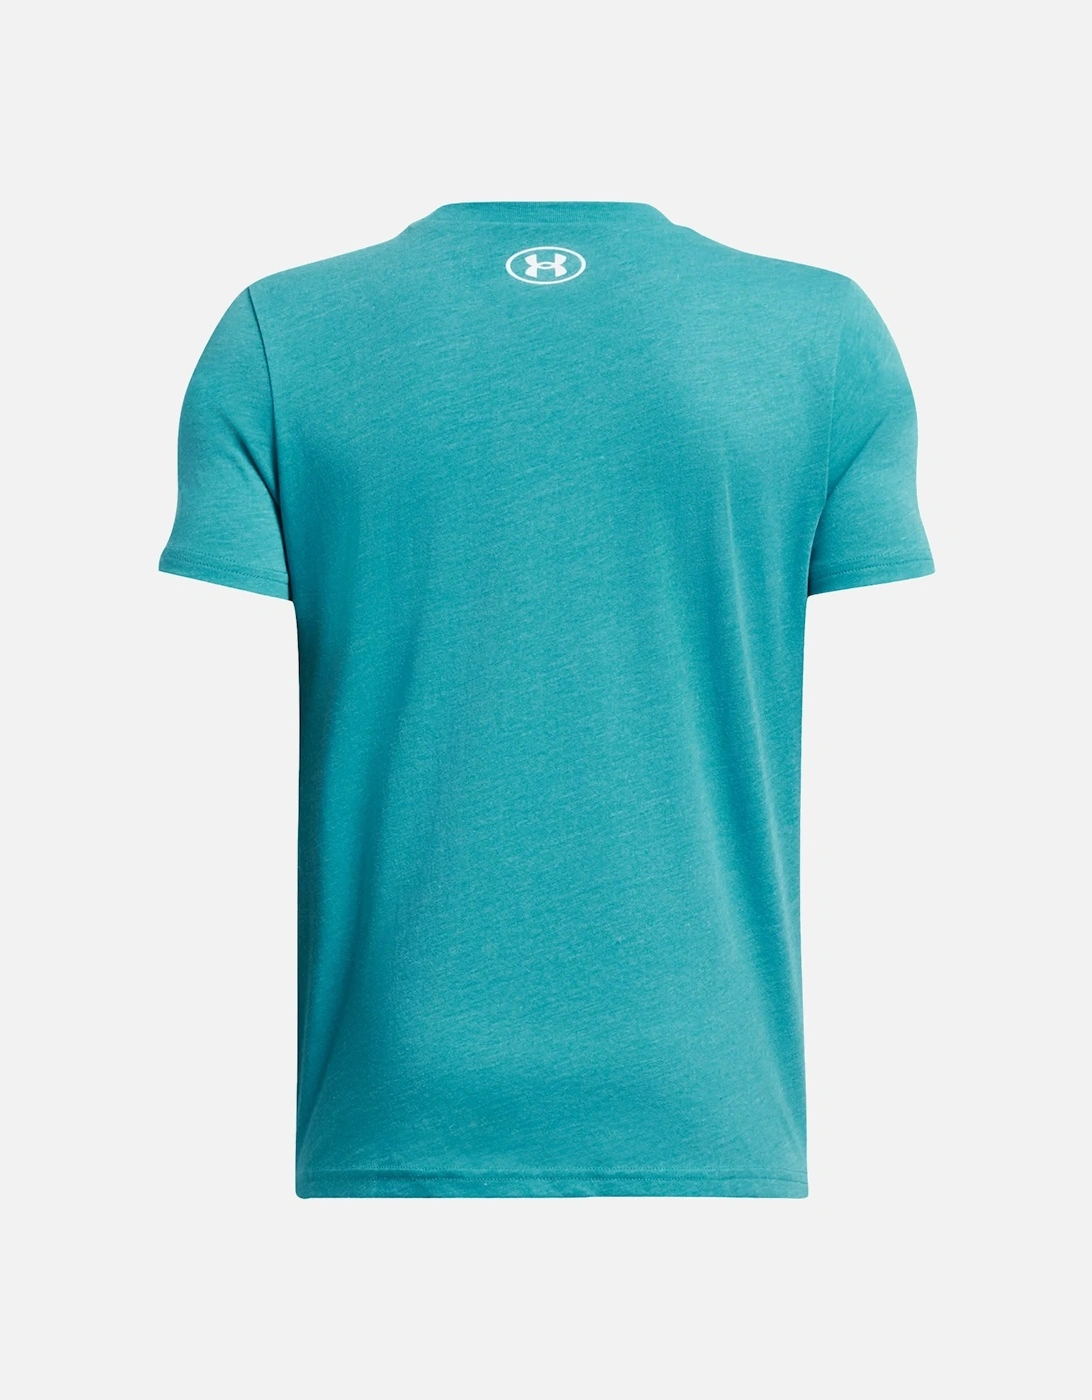 Youths Team Issue Wordmark T-Shirt (Teal)